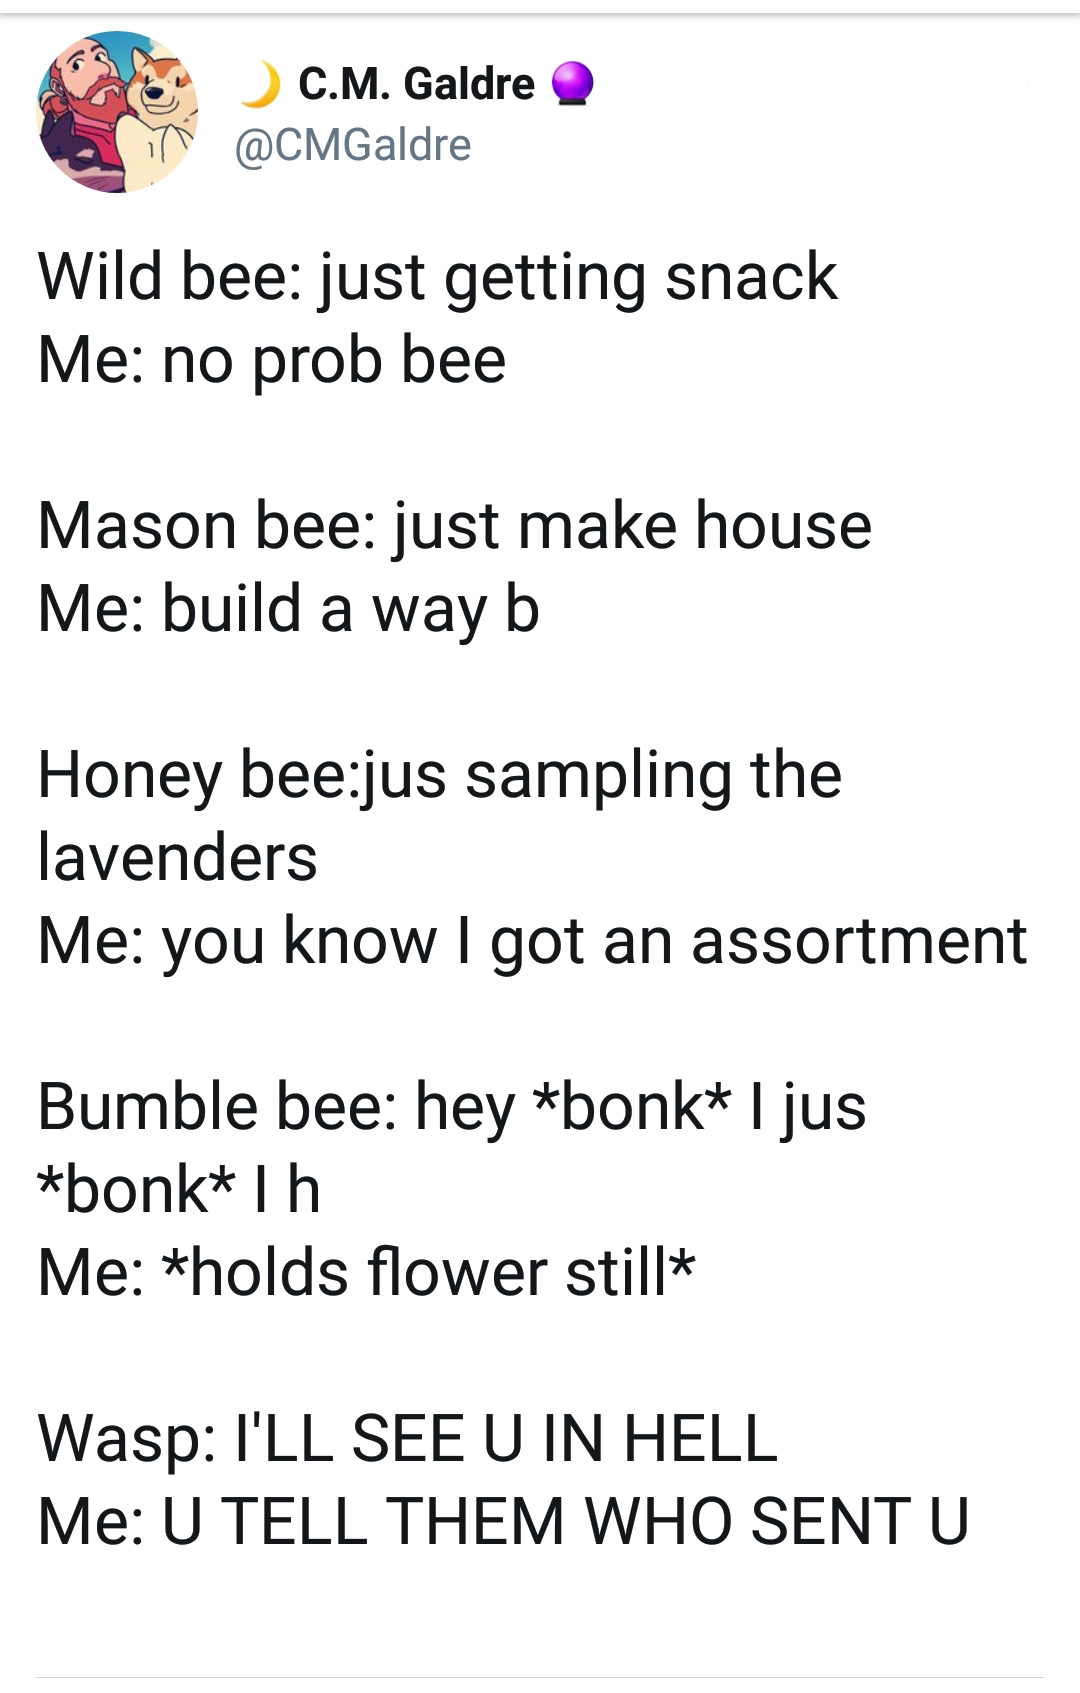 dank meme bee meme wasp - C.M. Galdre Wild bee just getting snack Me no prob bee Mason bee just make house Me build a way b Honey beejus sampling the lavenders Me you know I got an assortment Bumble bee hey bonk I jus bonk 1 h Me holds flower still Wasp I